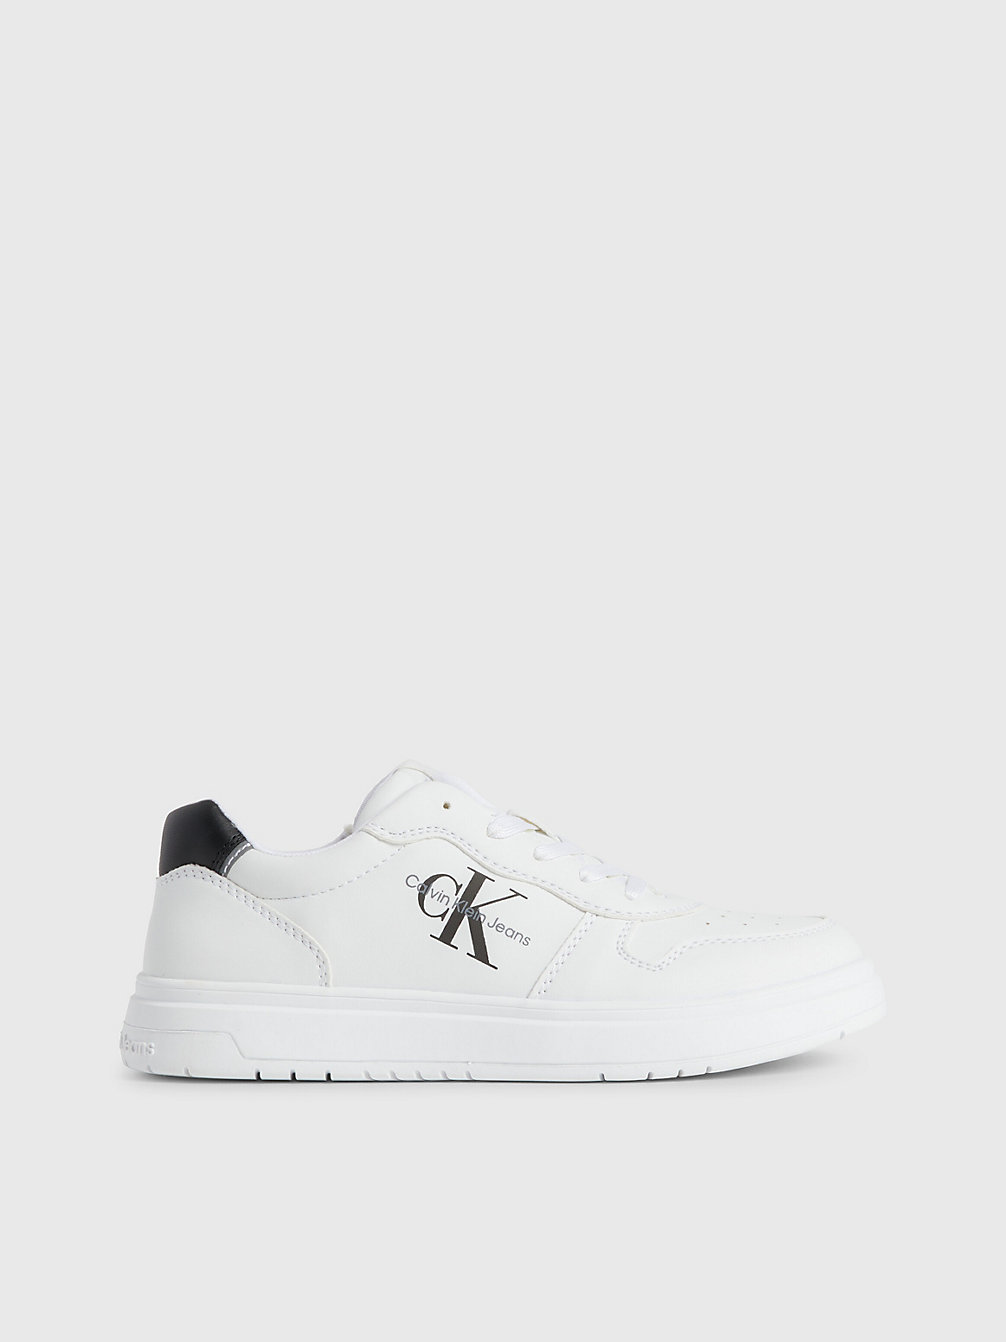 WHITE Kids Recycled Trainers undefined kids unisex Calvin Klein